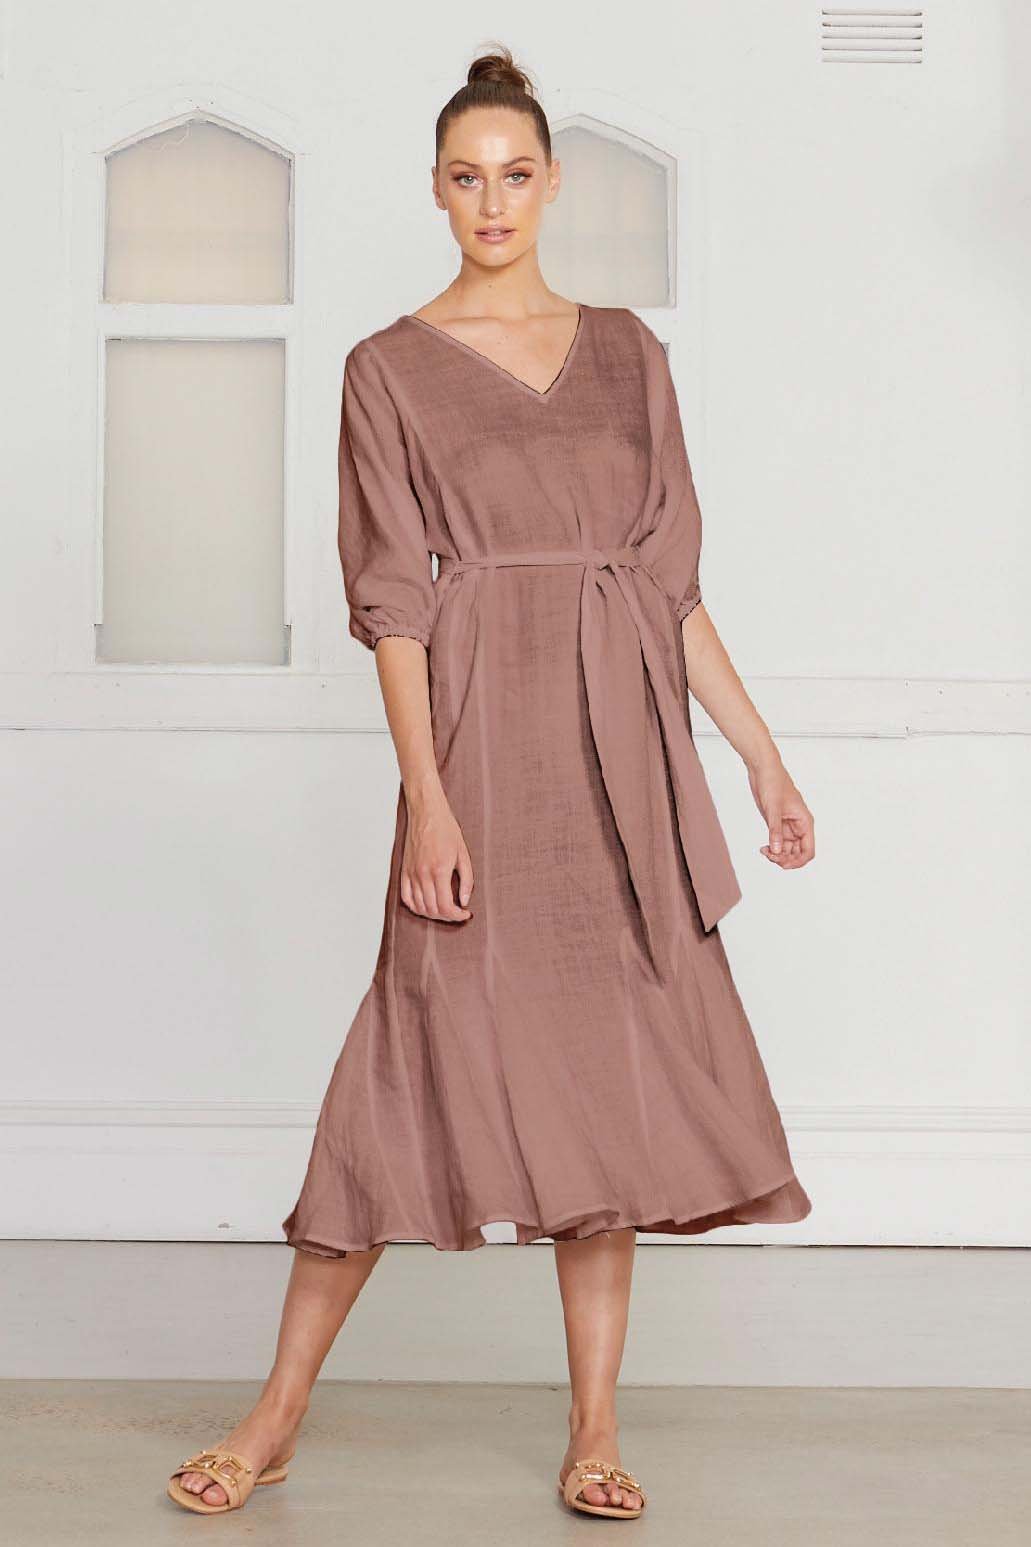 Fate + Becker Love is Dress in Smoked Pearl - Hey Sara